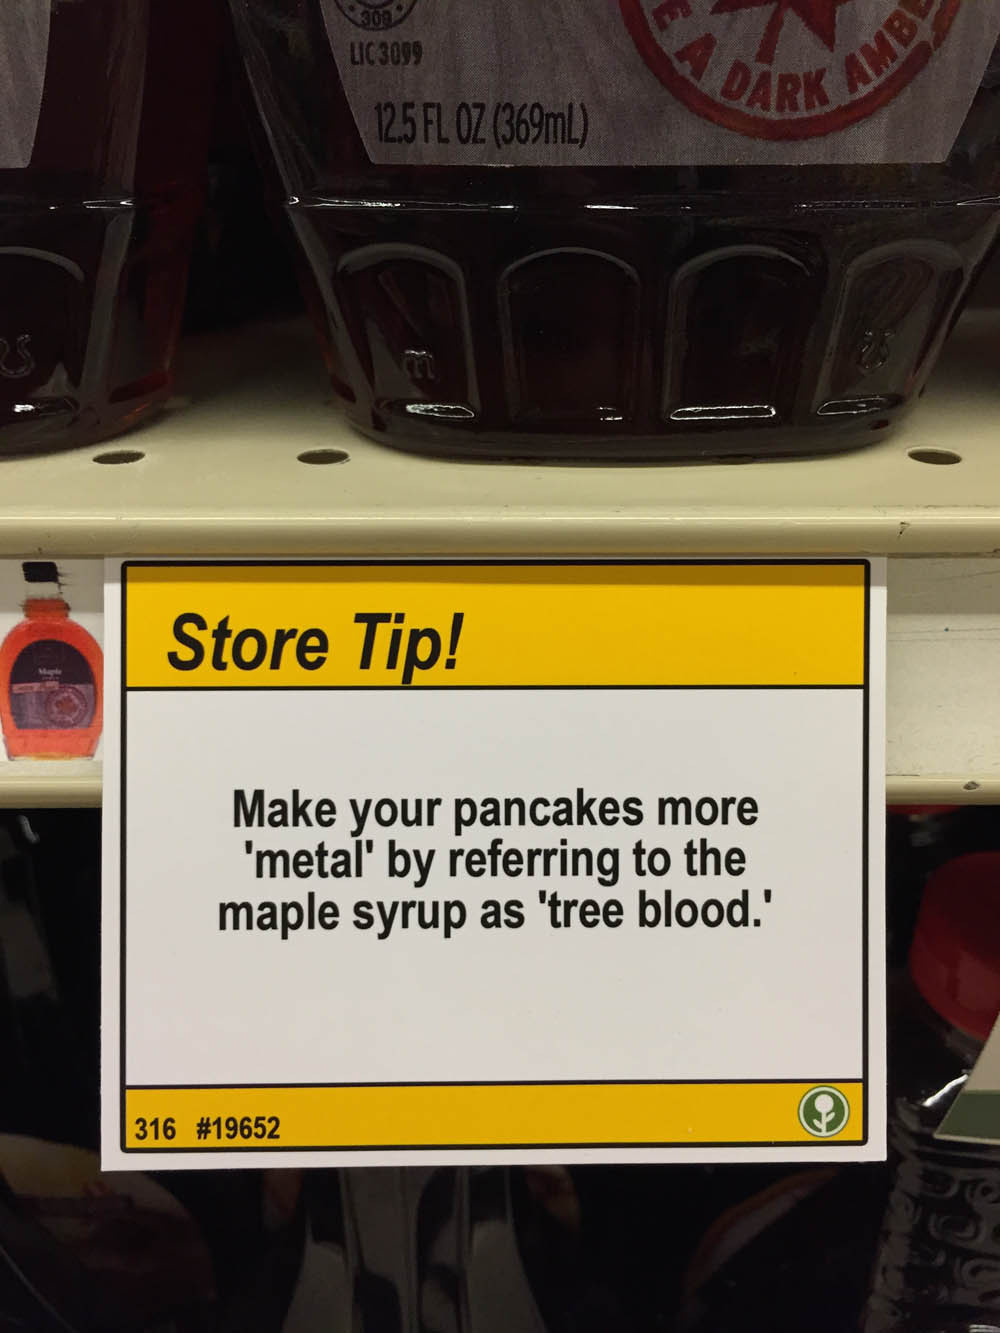 untexting:  obviousplant:  I added some store tips to a nearby grocery store   Come